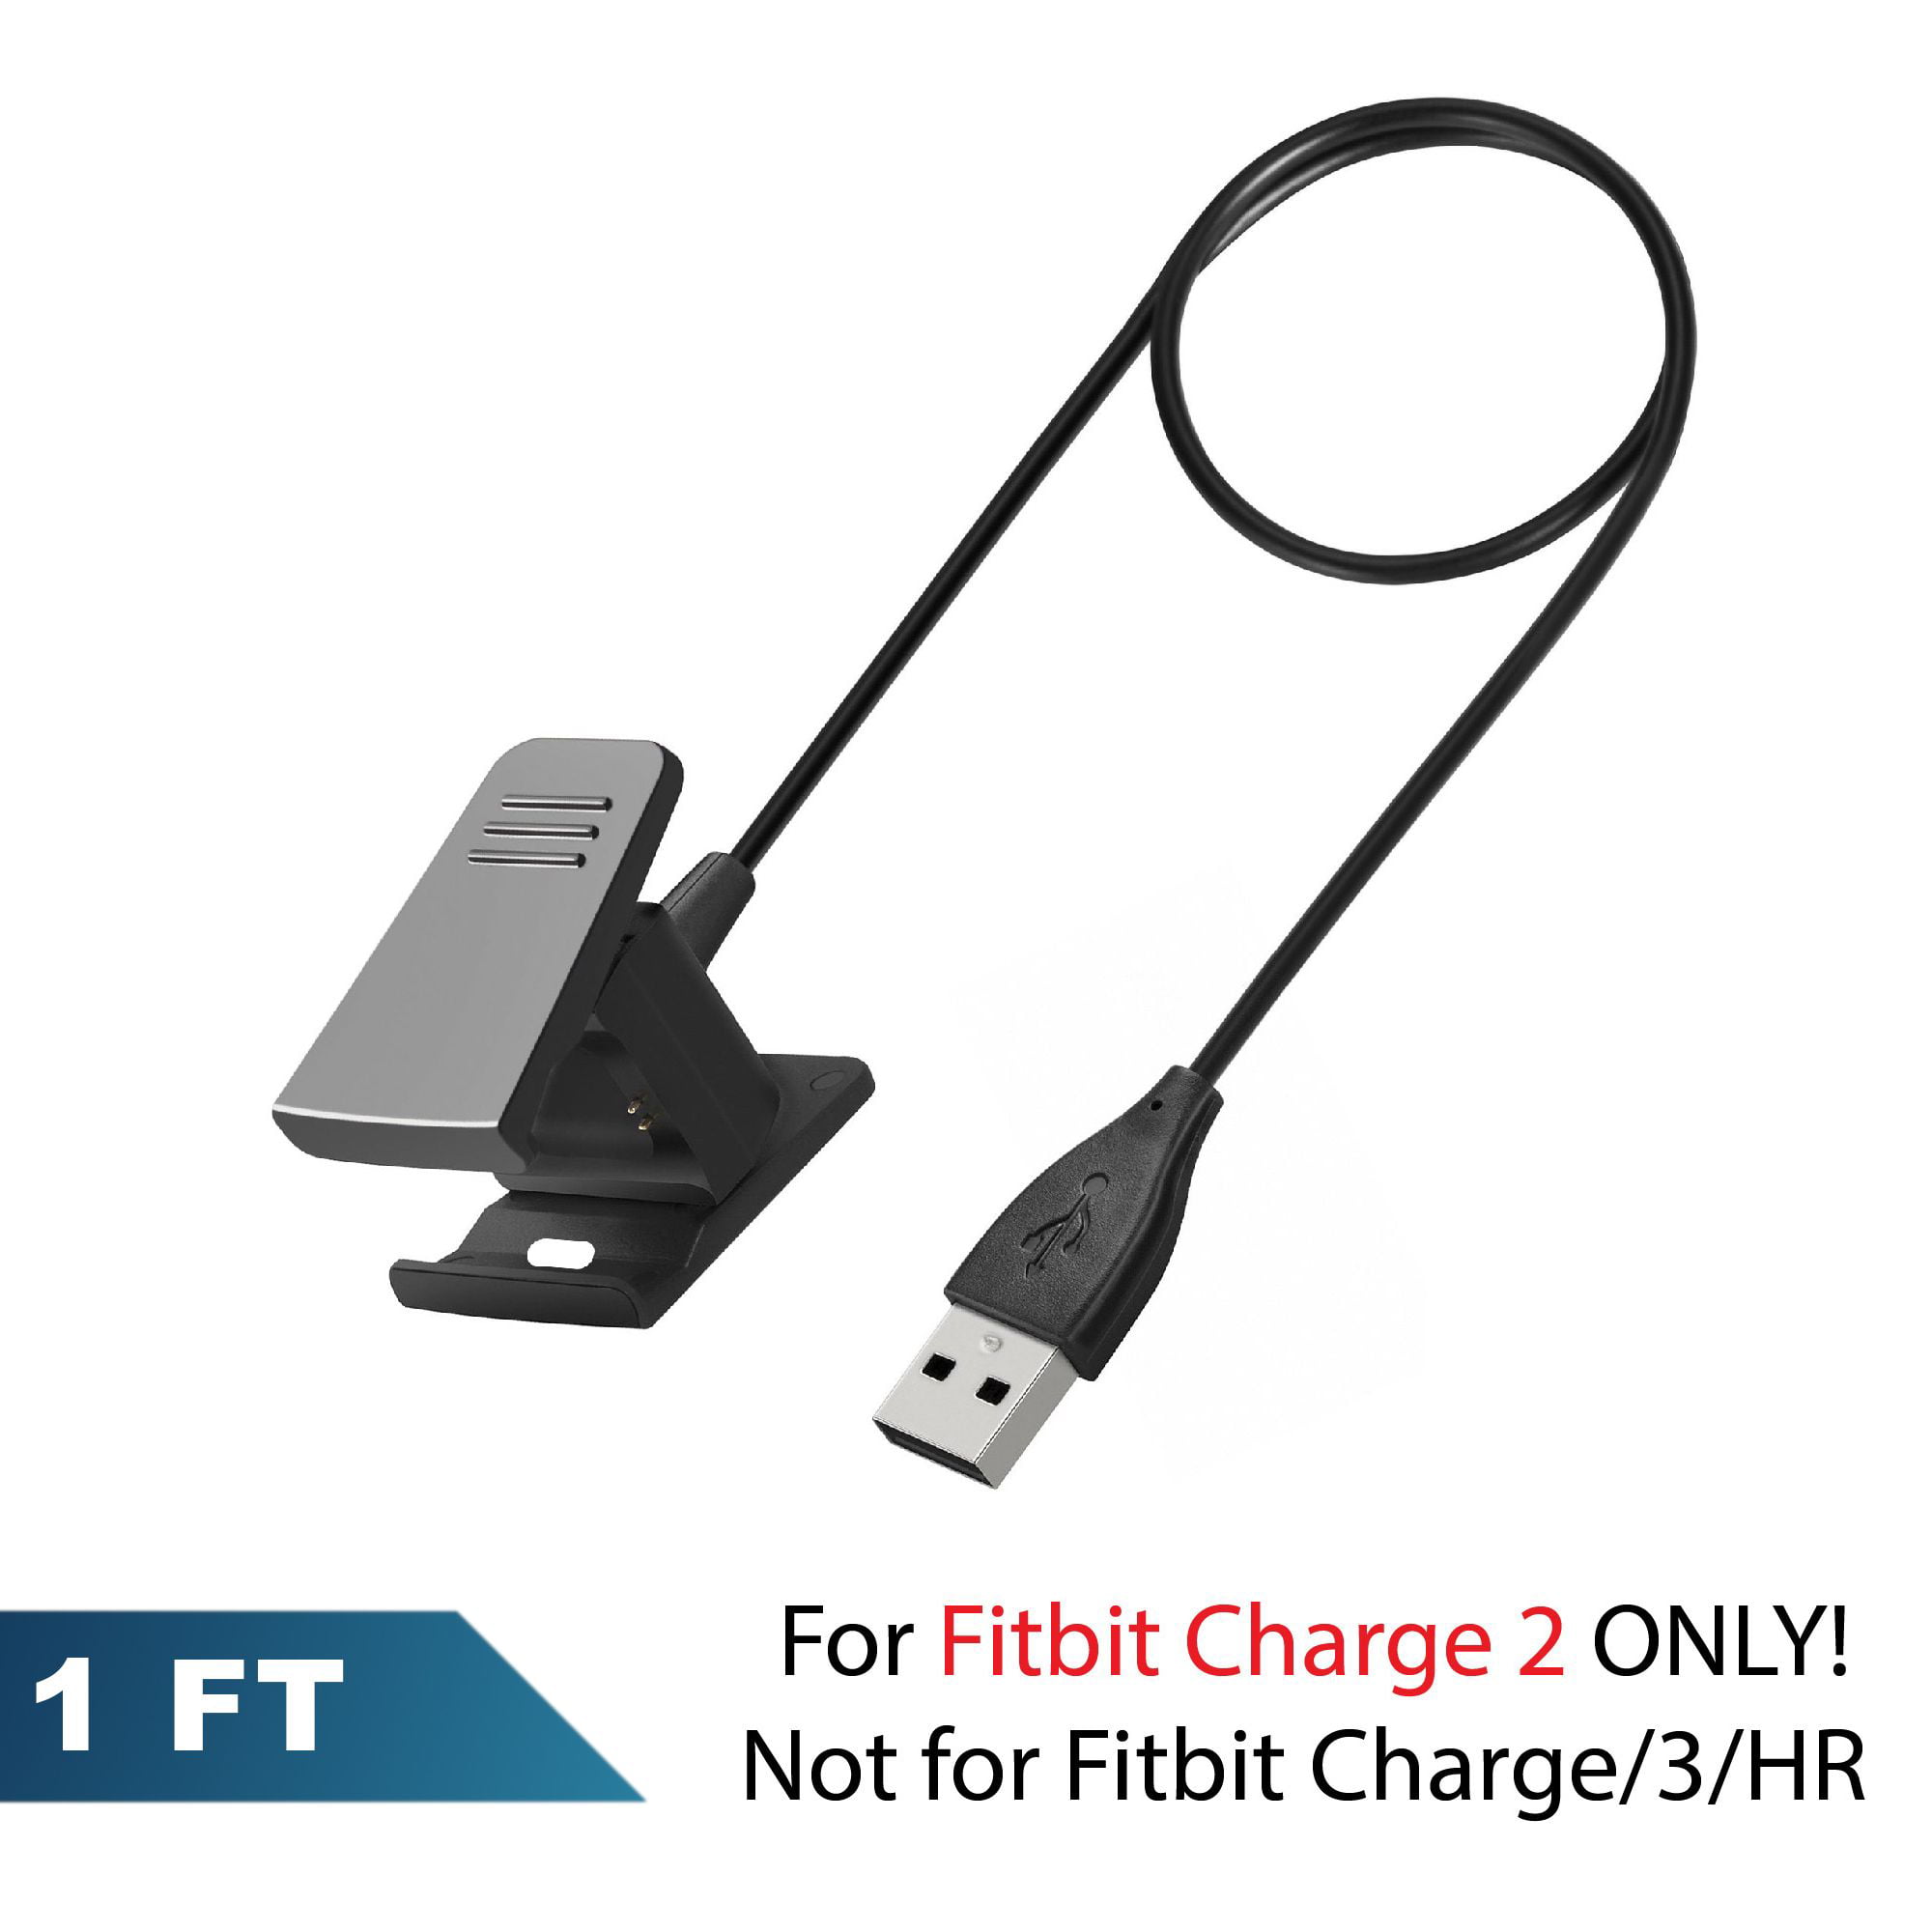 2X For Fitbit Flex2 USB Charger Cable Fitness Smart Wristband Charging Cord CA 